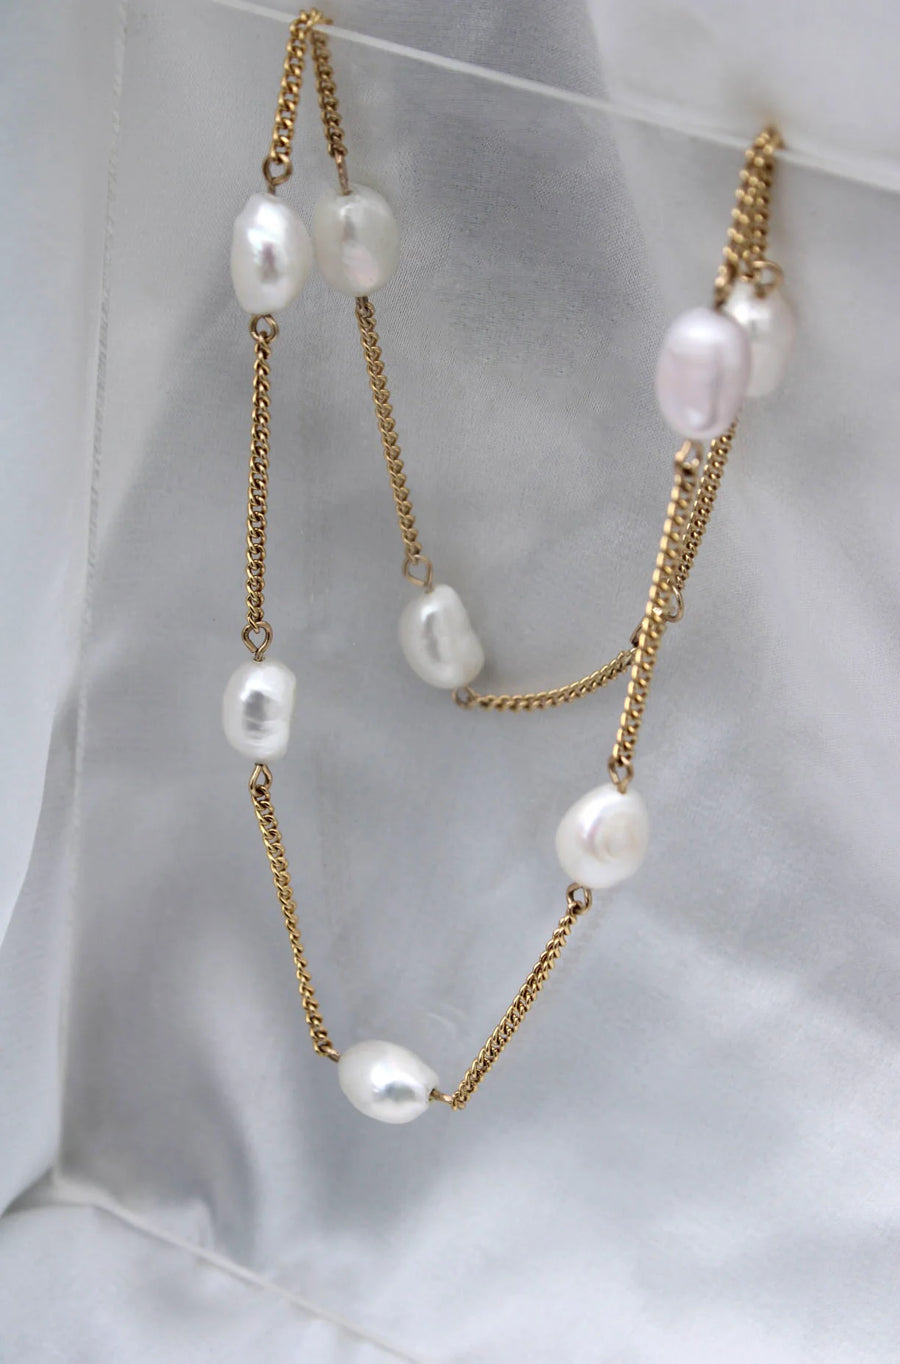 Simple Pleasures Pearl Necklace - Becoming Jewelry